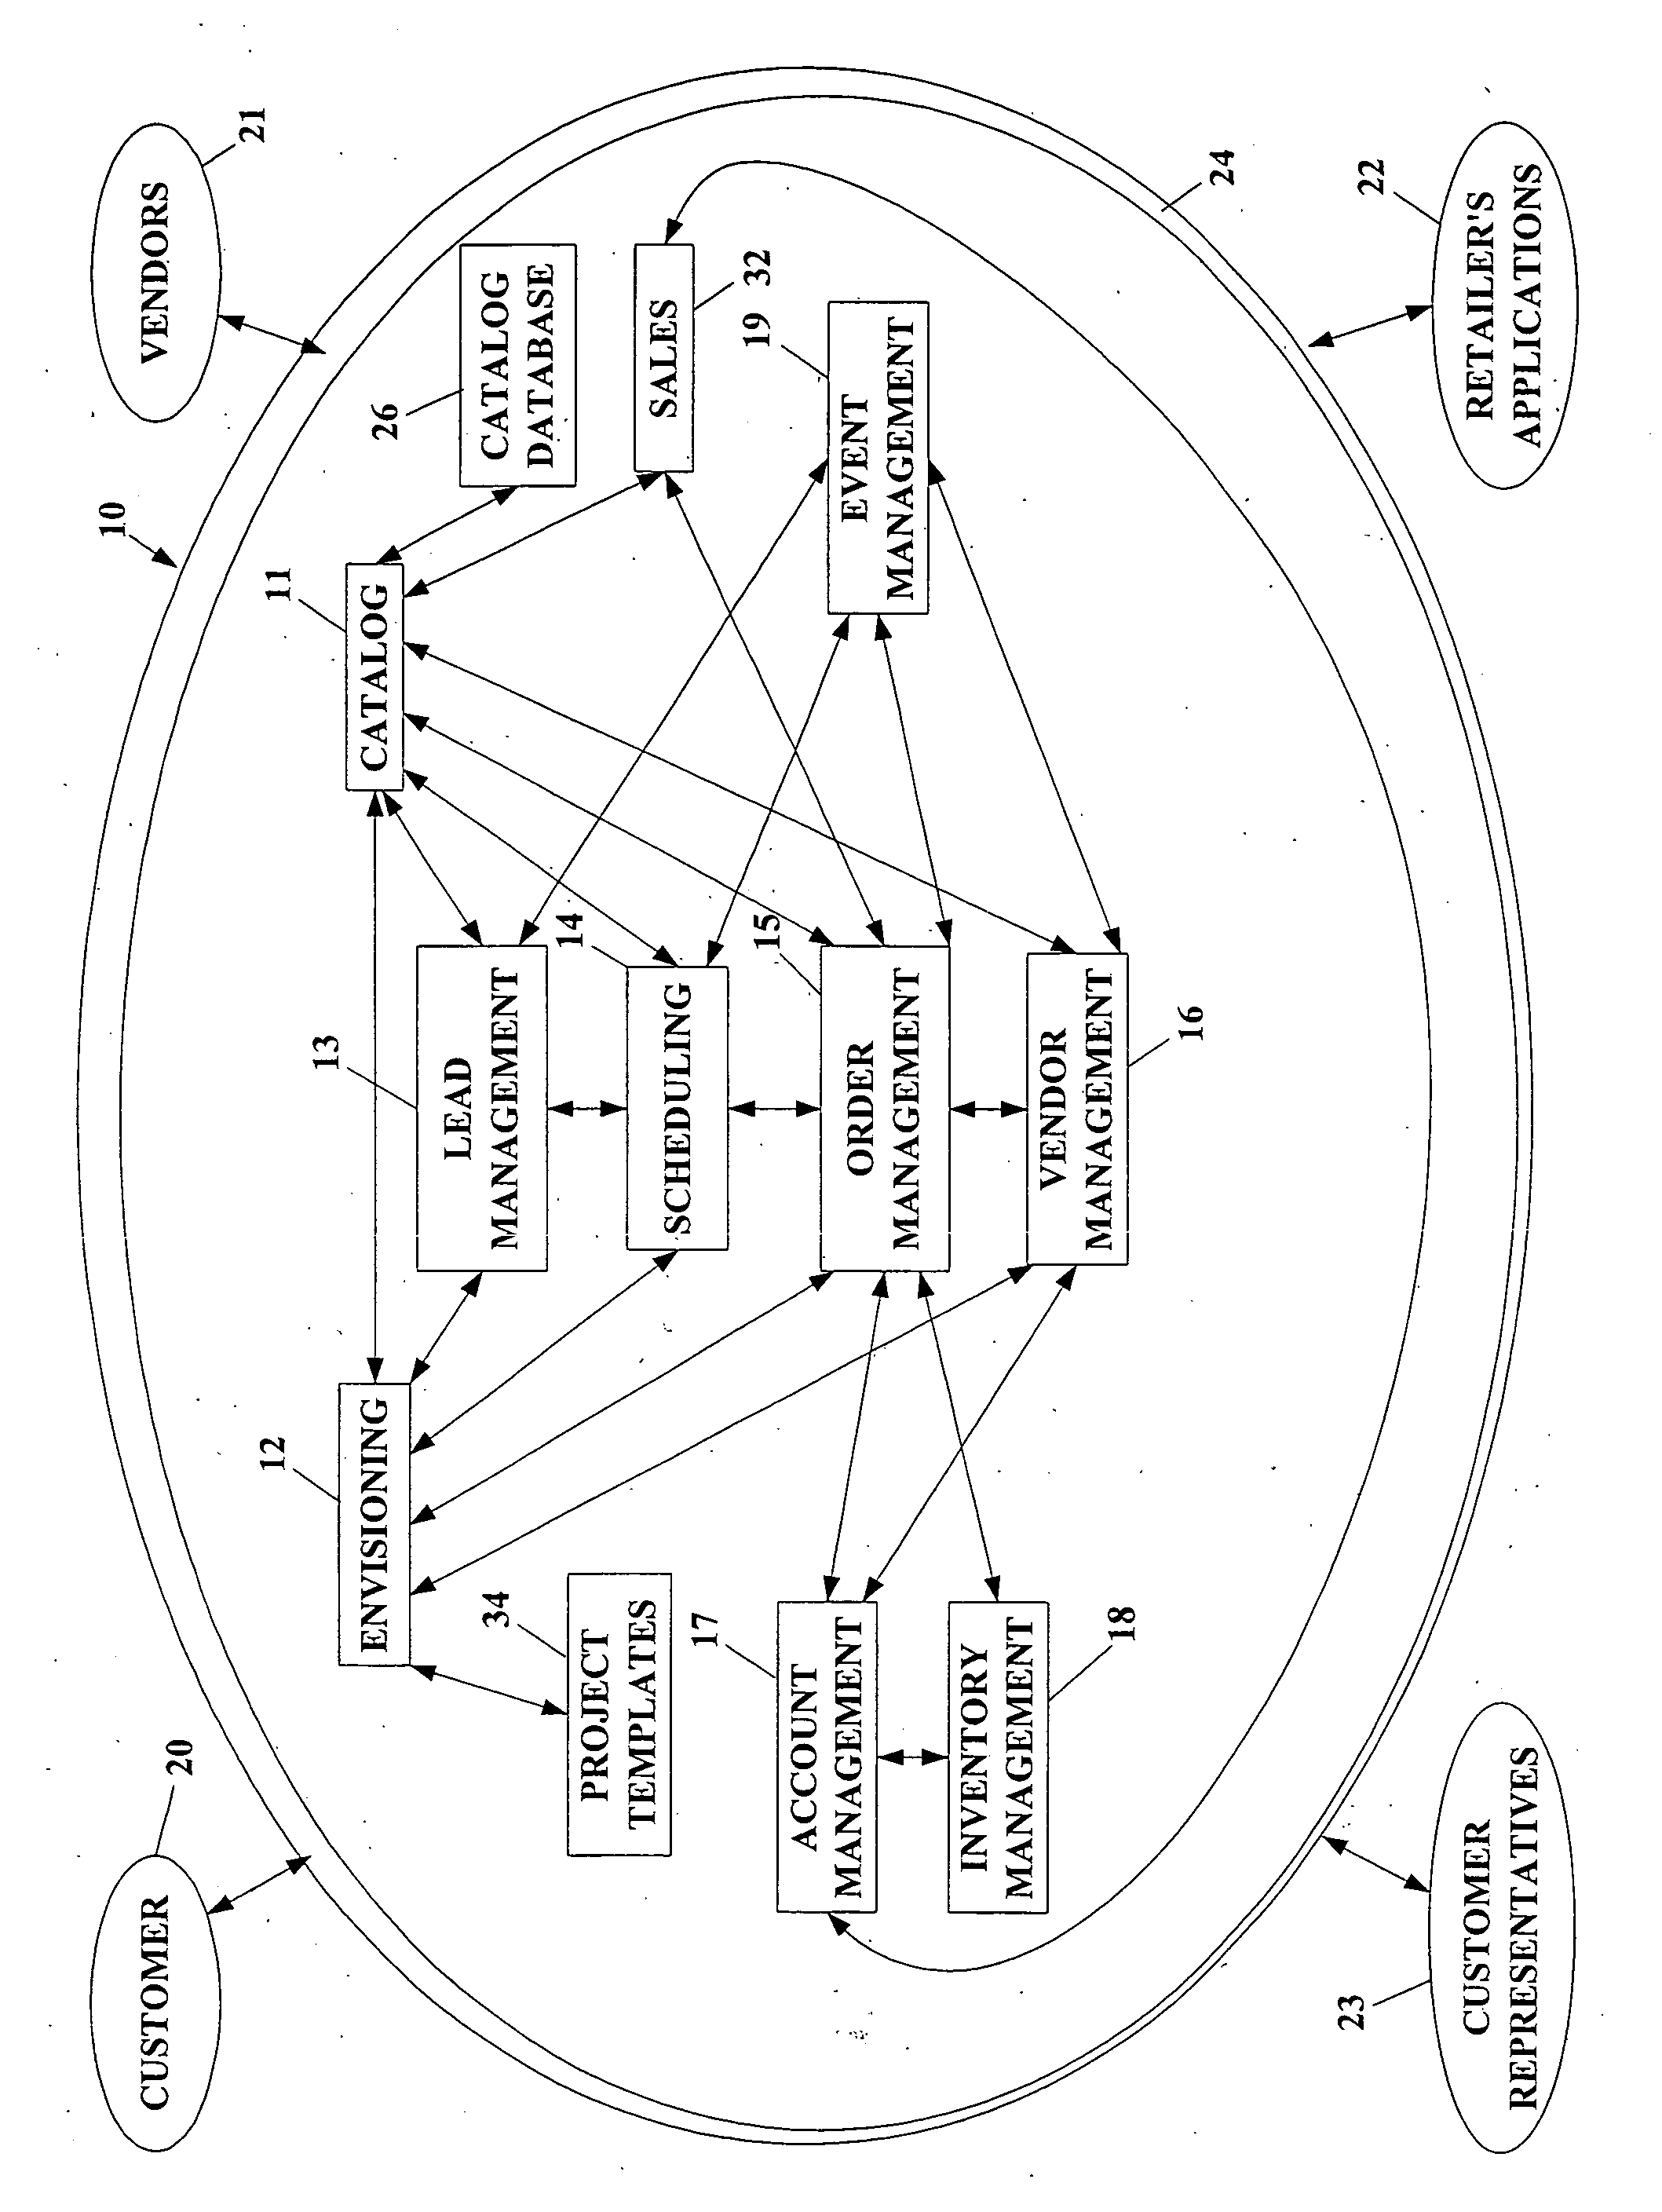 Systems, methods and computer program products for implementing processes relating to retail sales